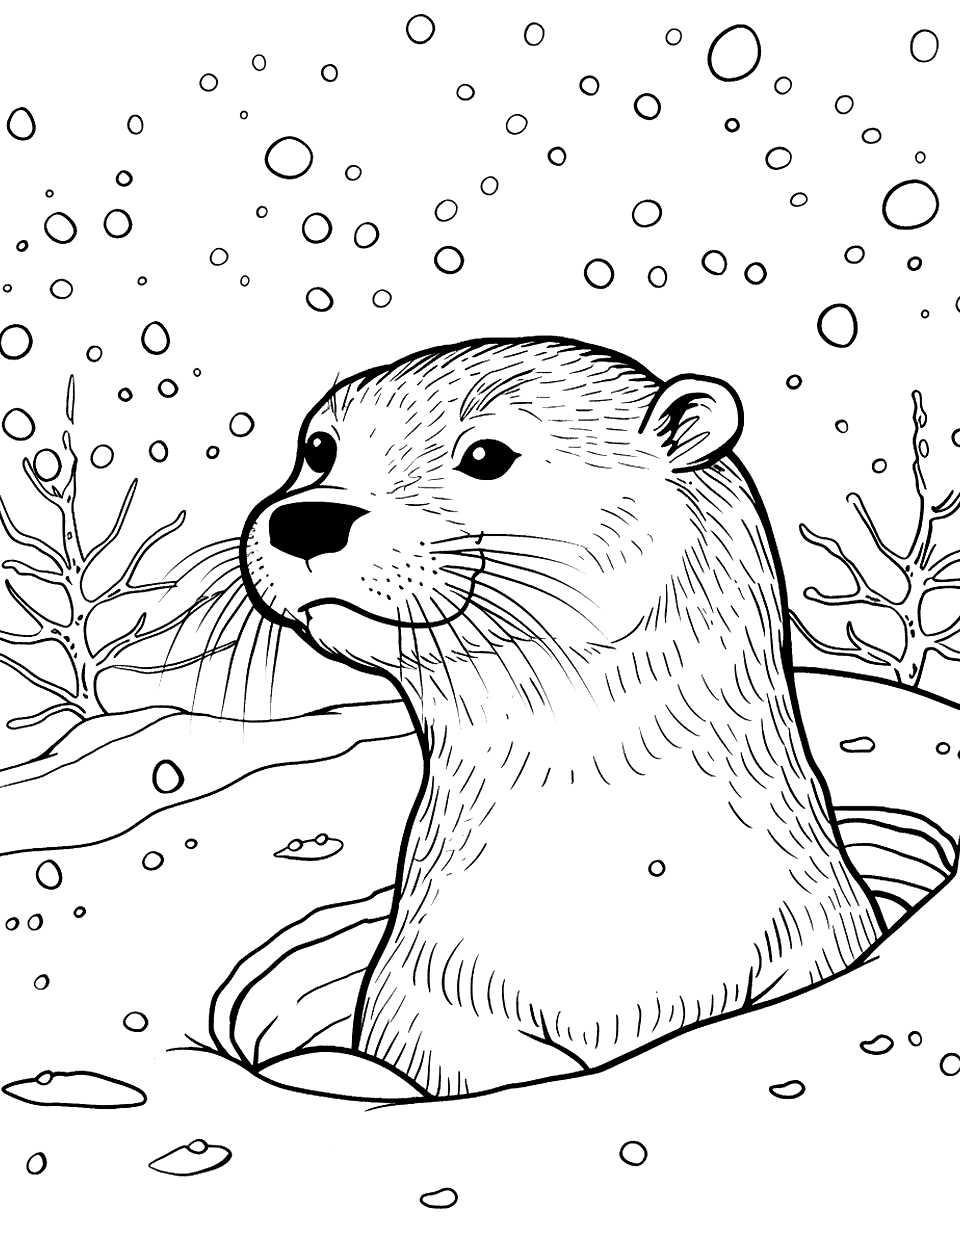 Winter Otter in the Snow Coloring Page - An otter peeking out of a snowy burrow, with snowflakes falling around it.